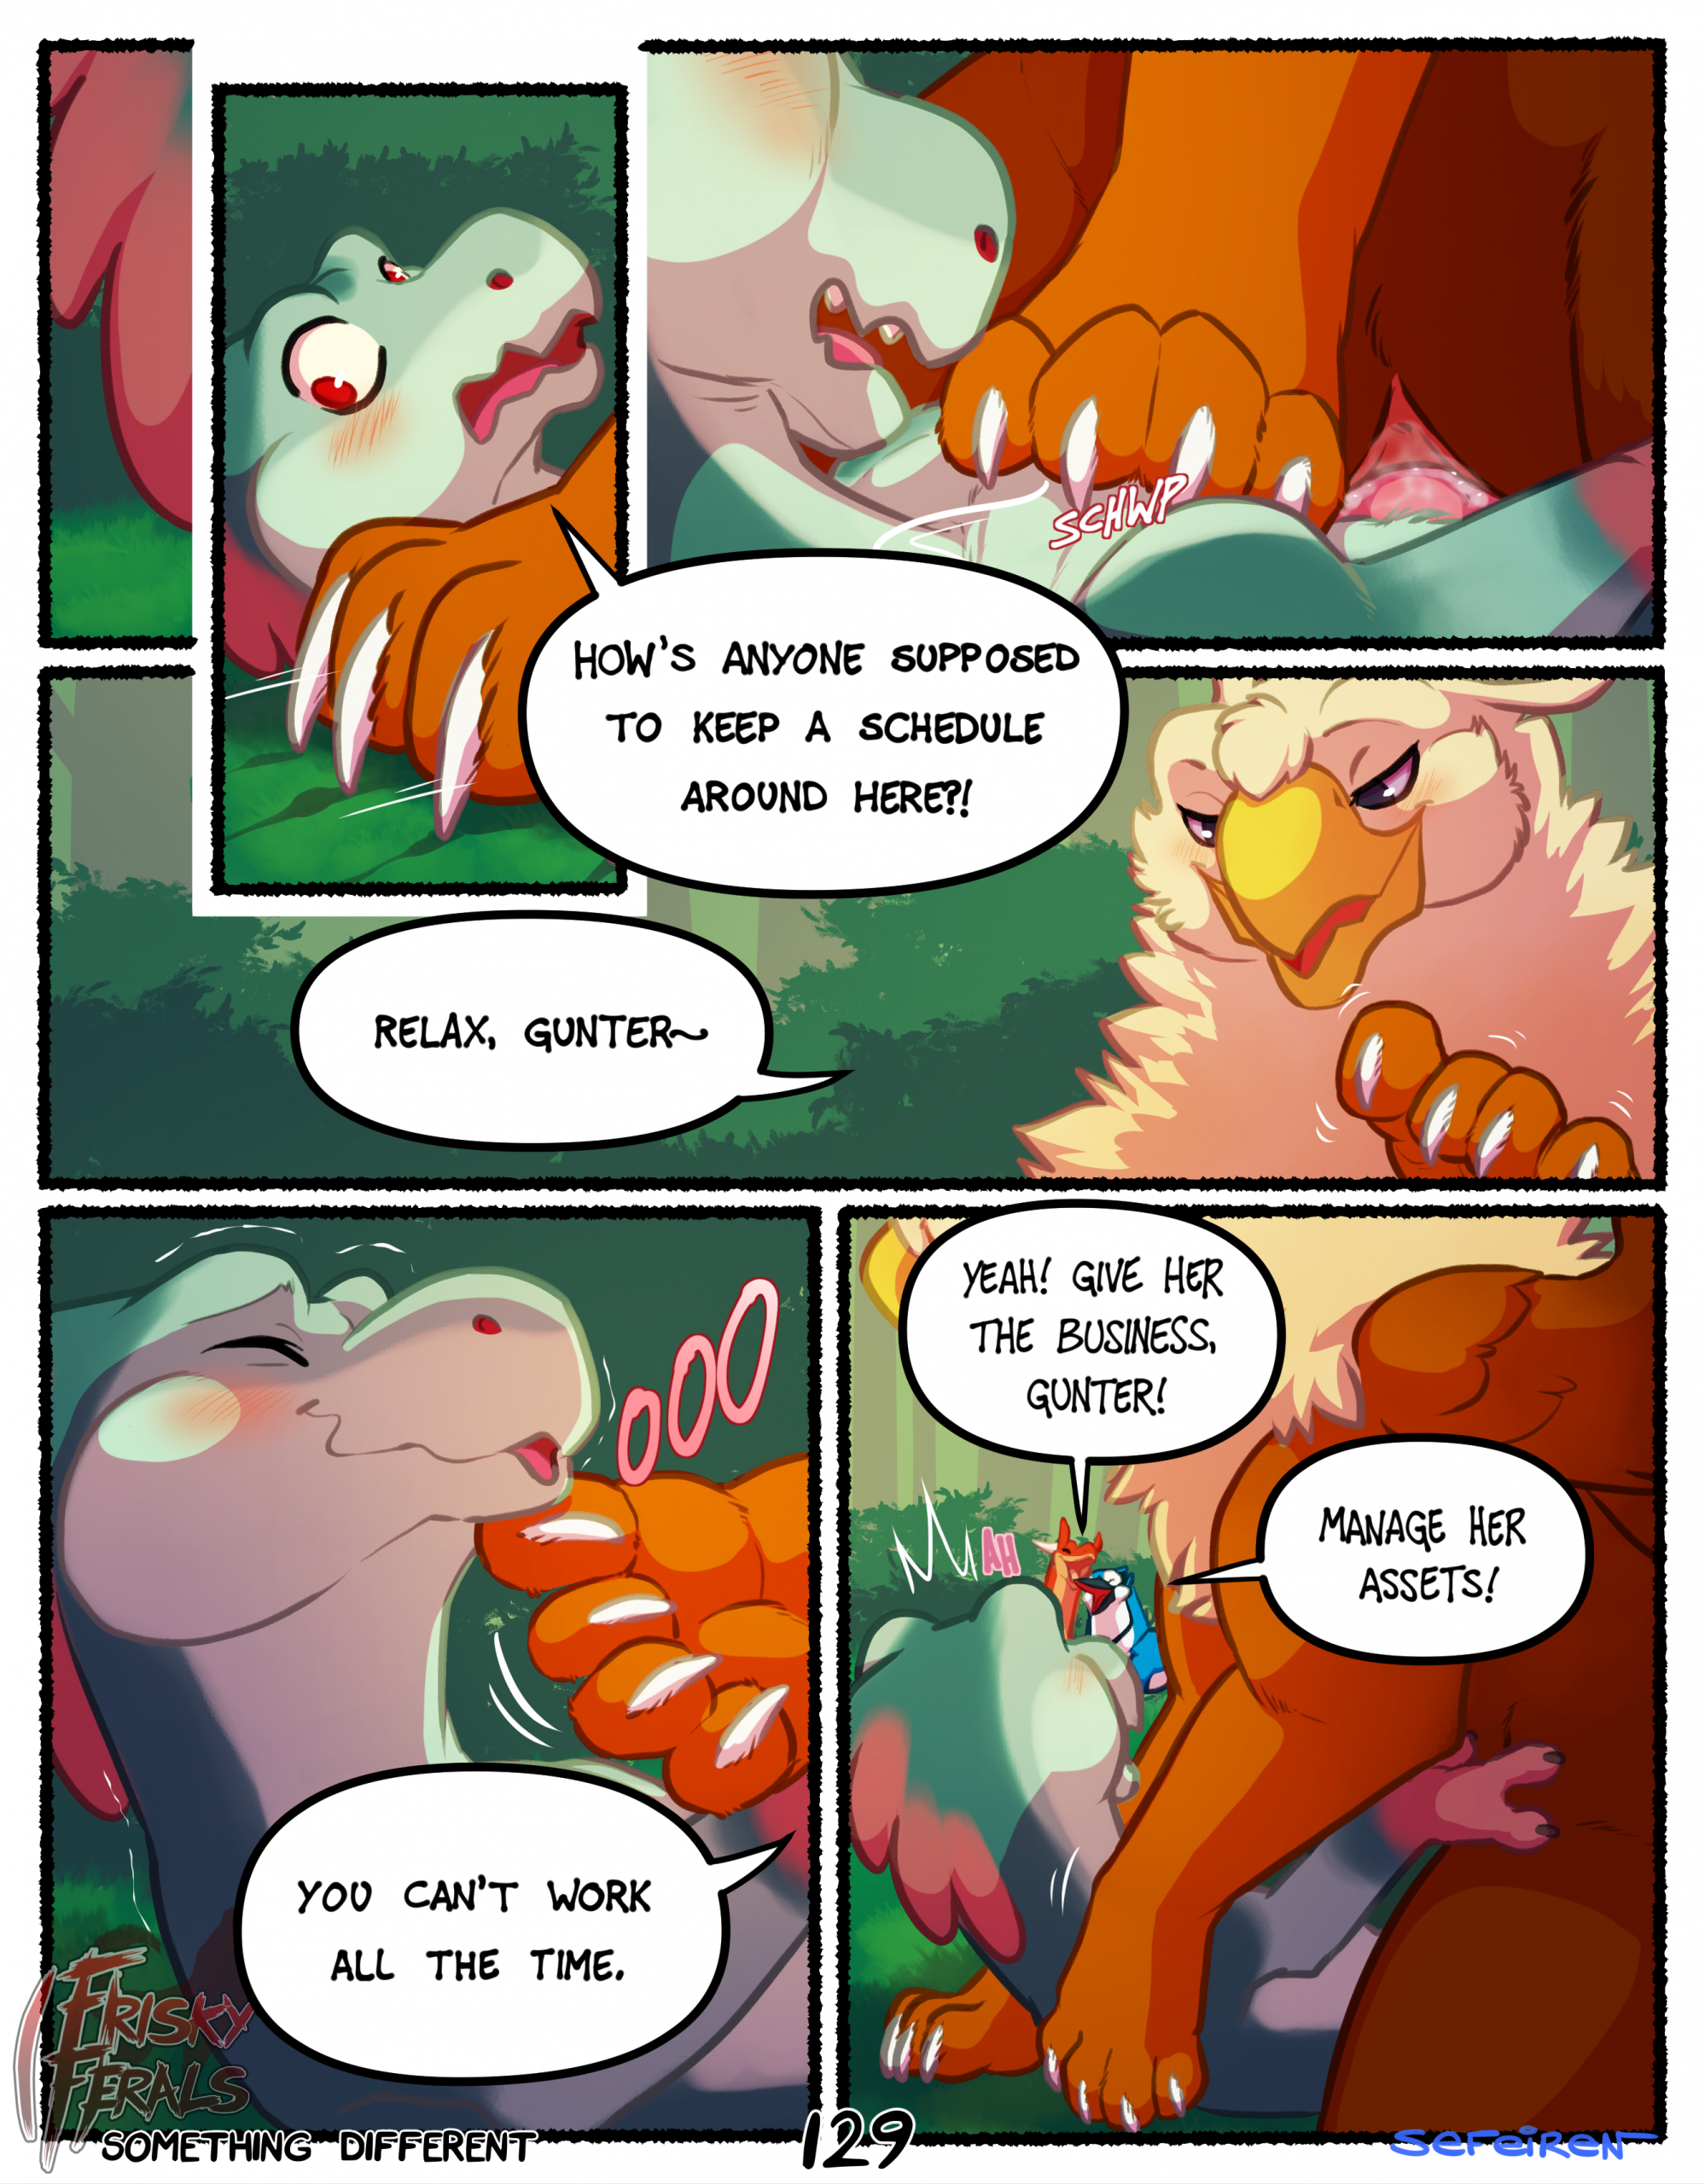 Frisky Ferals - Something Different porn comic picture 129